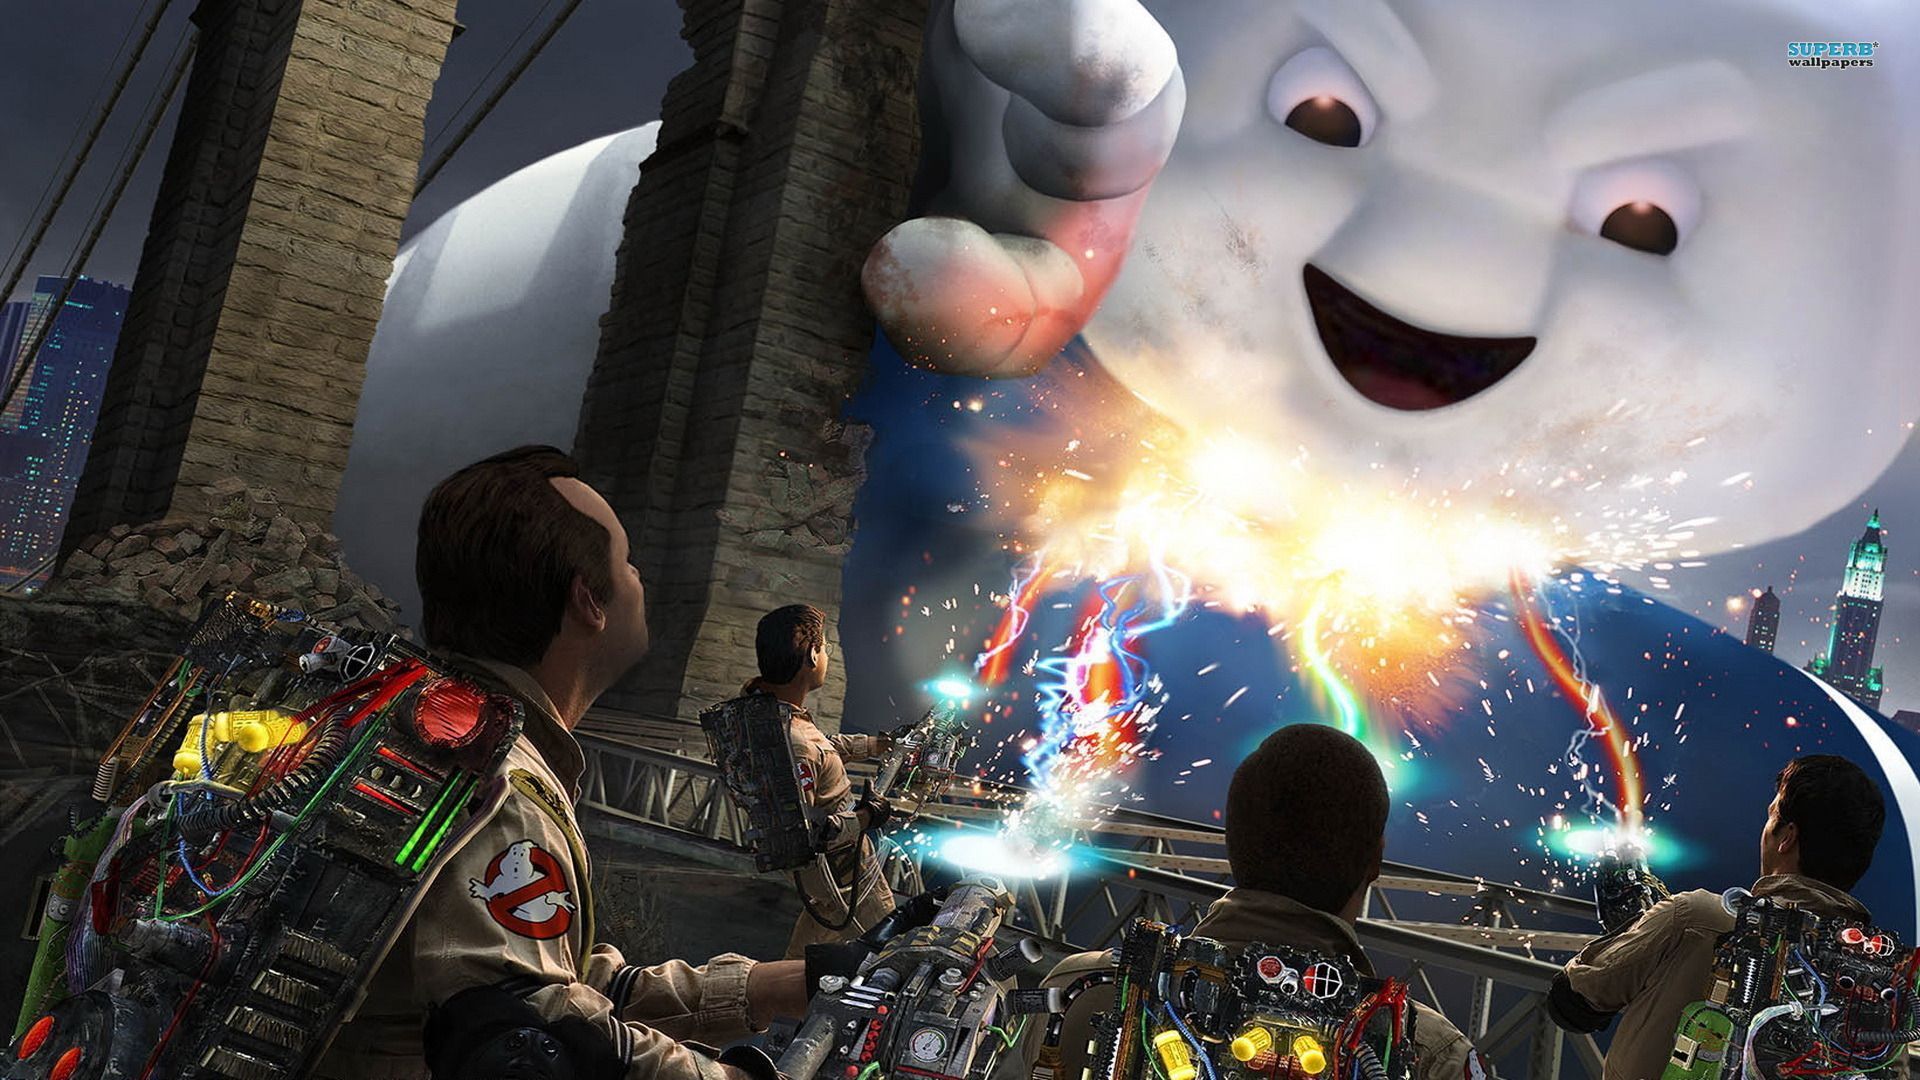 Cool Video Game Wallpapers Xghostbusters The Video Game Wallpaper ...